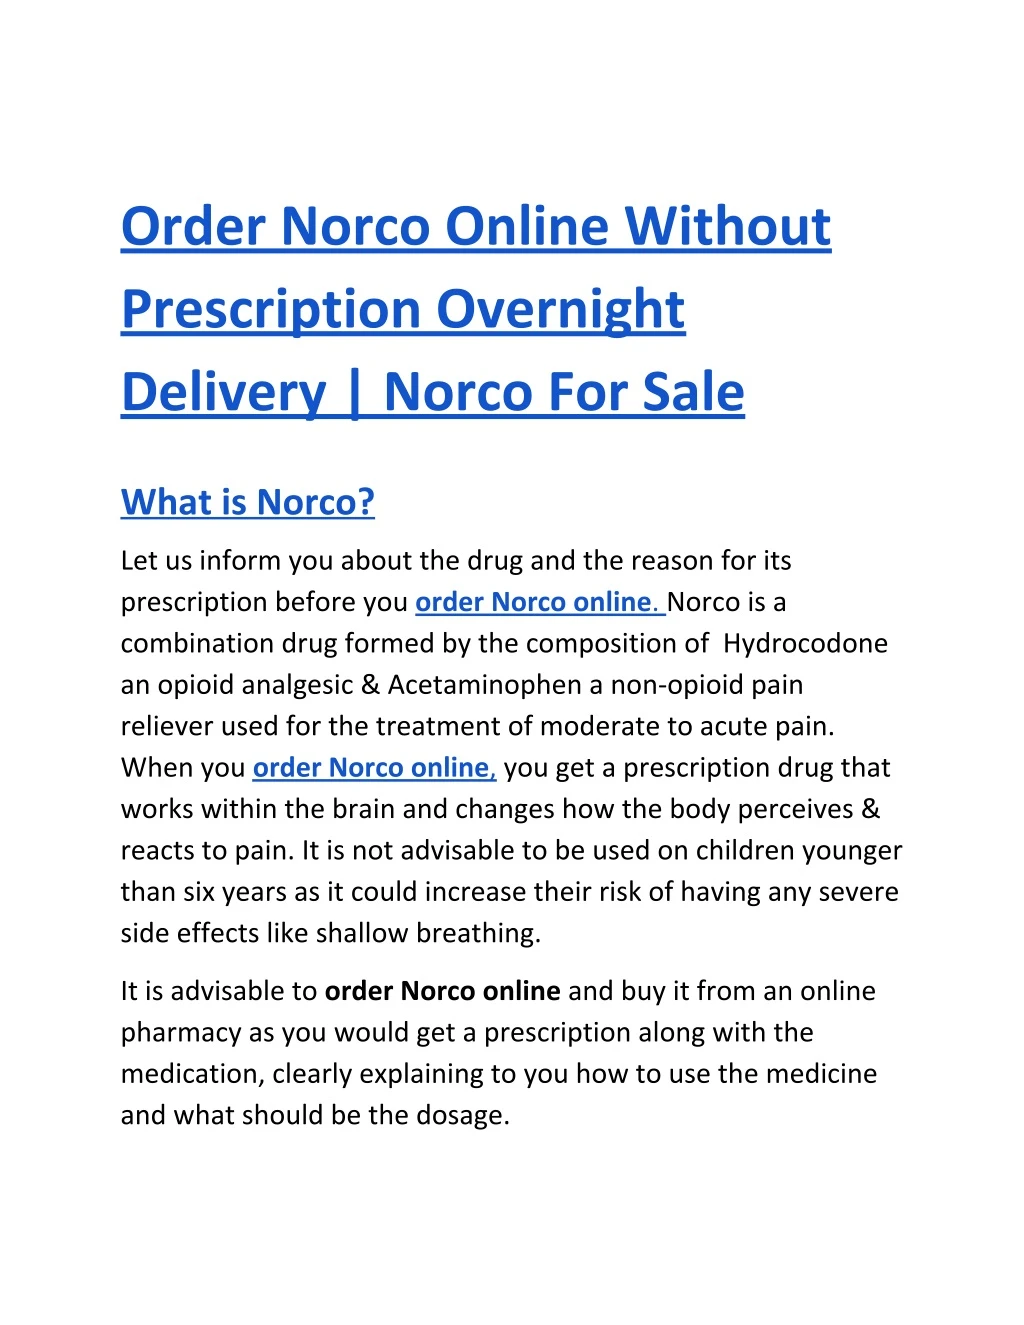 order norco online without prescription overnight